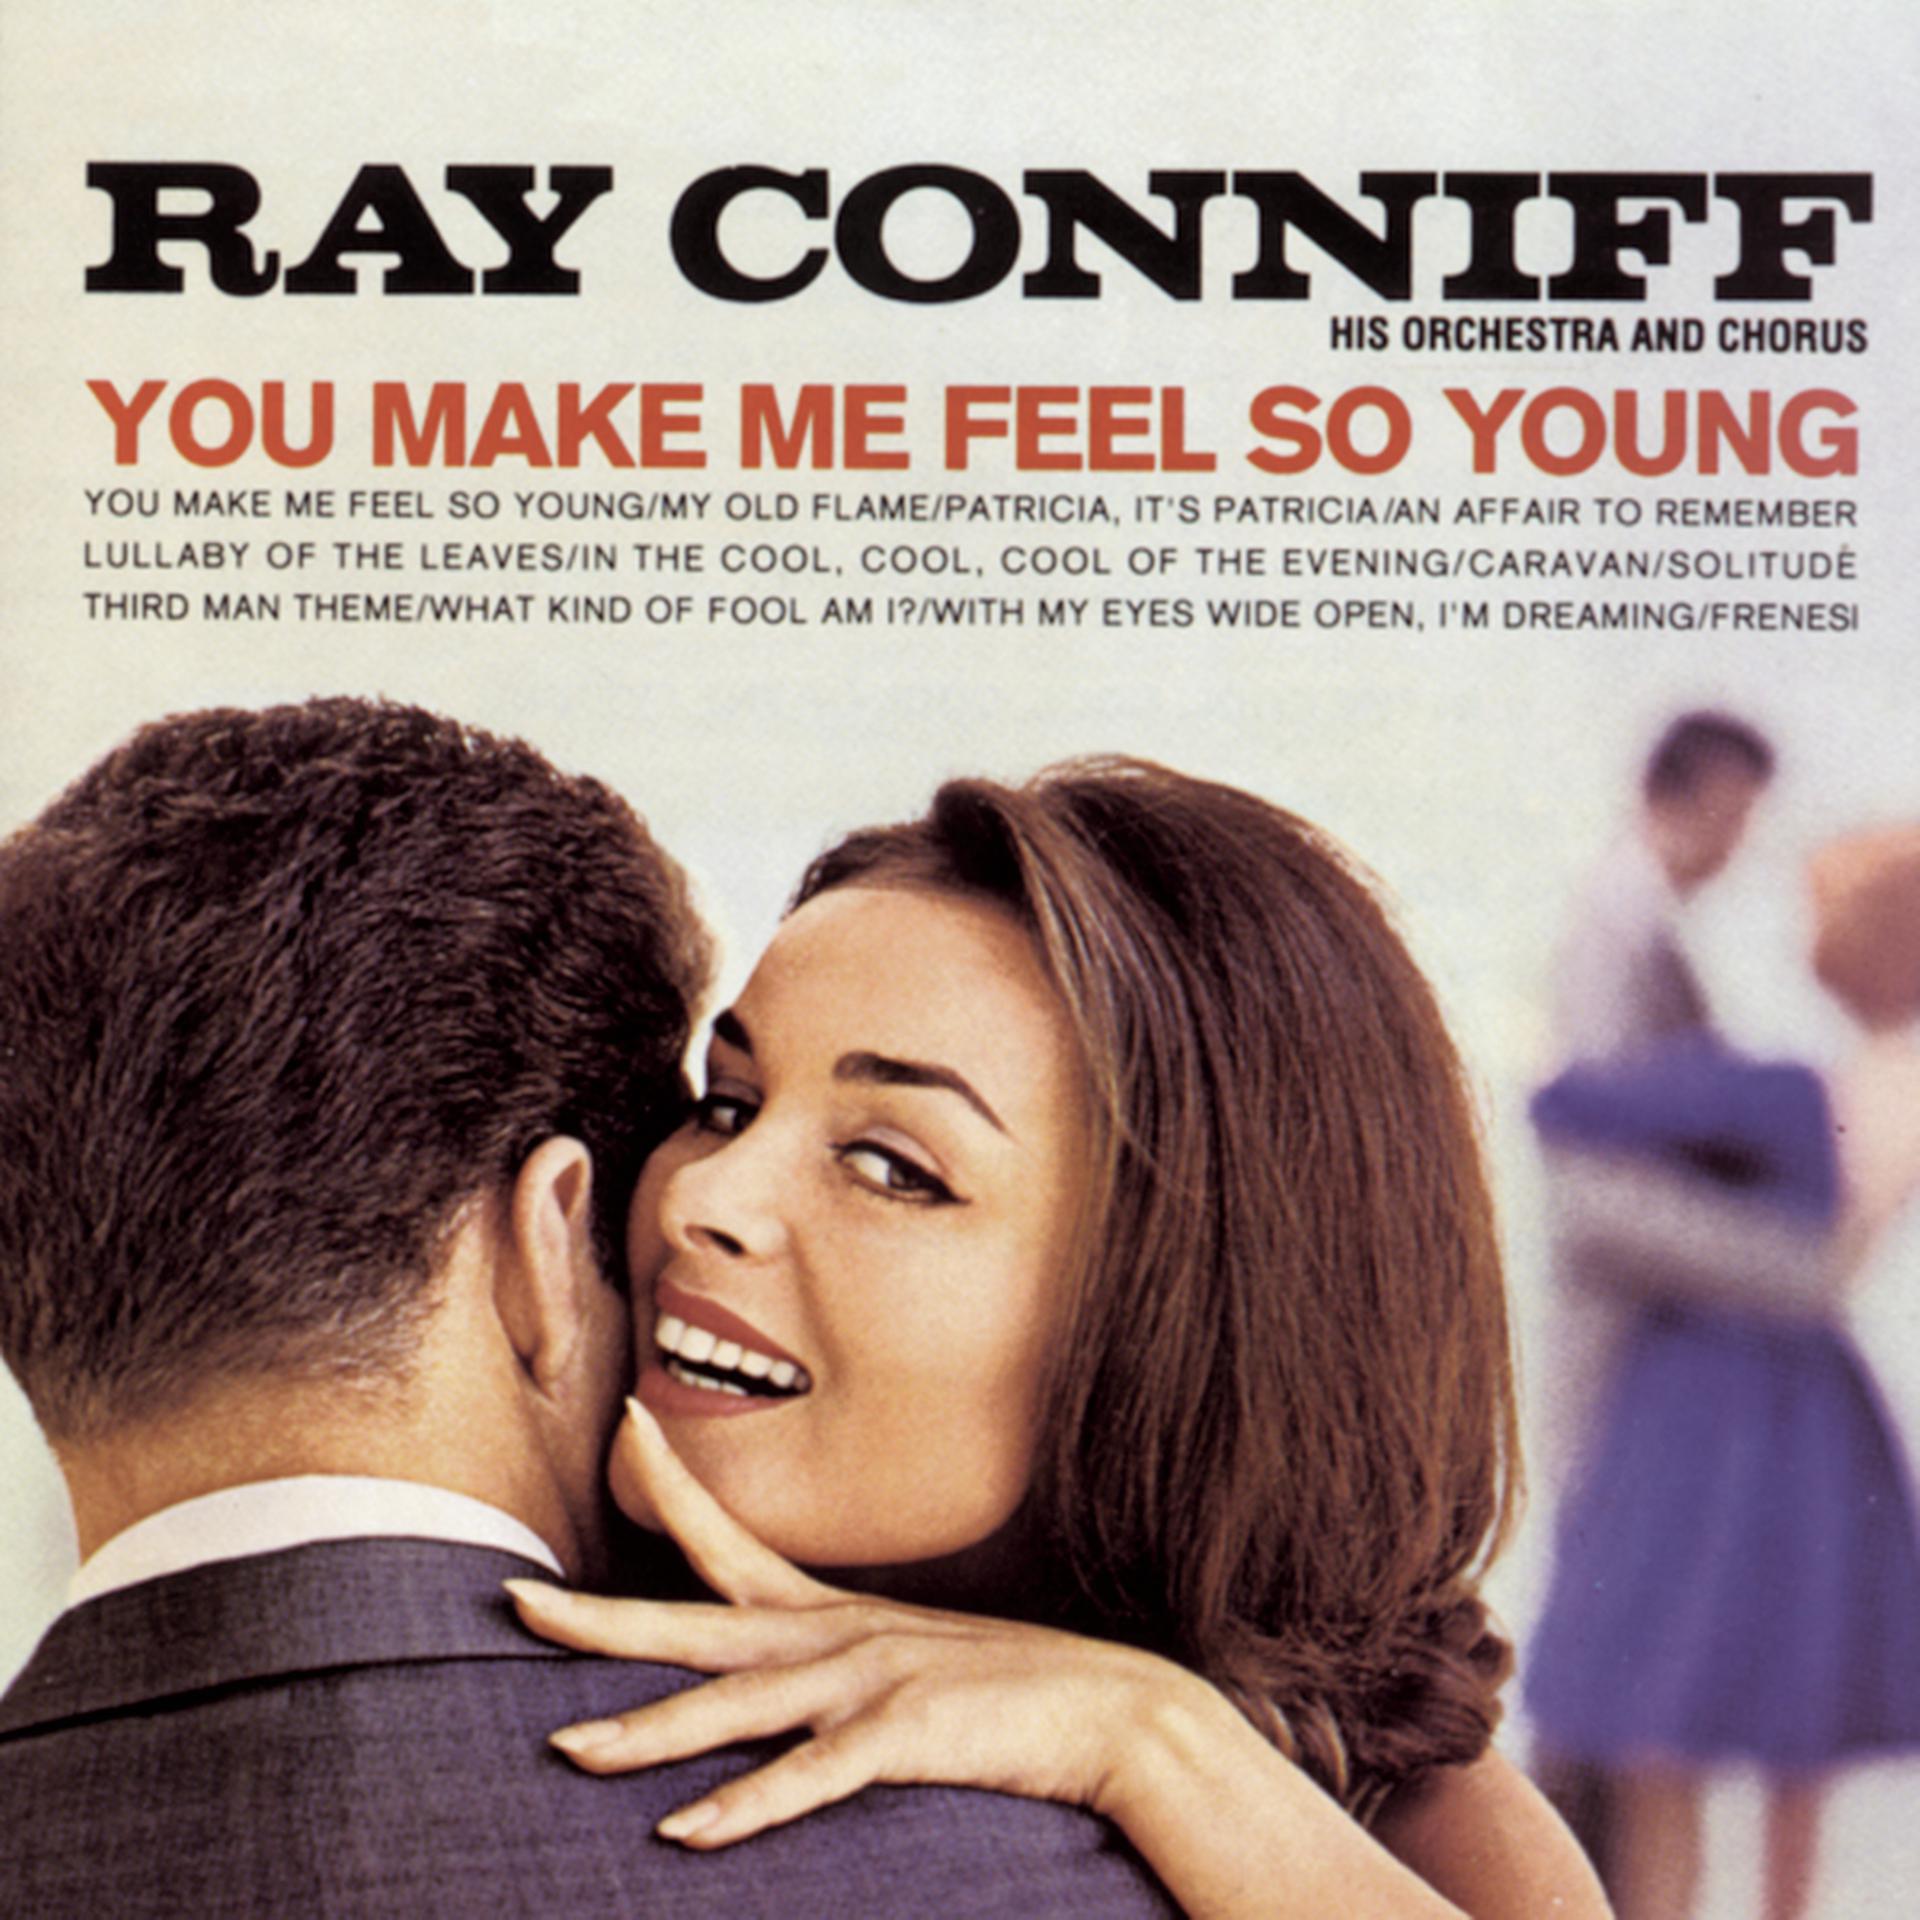 Постер к треку Ray Conniff & His Orchestra & Chorus - With My Eyes Wide Open, I'm Dreaming